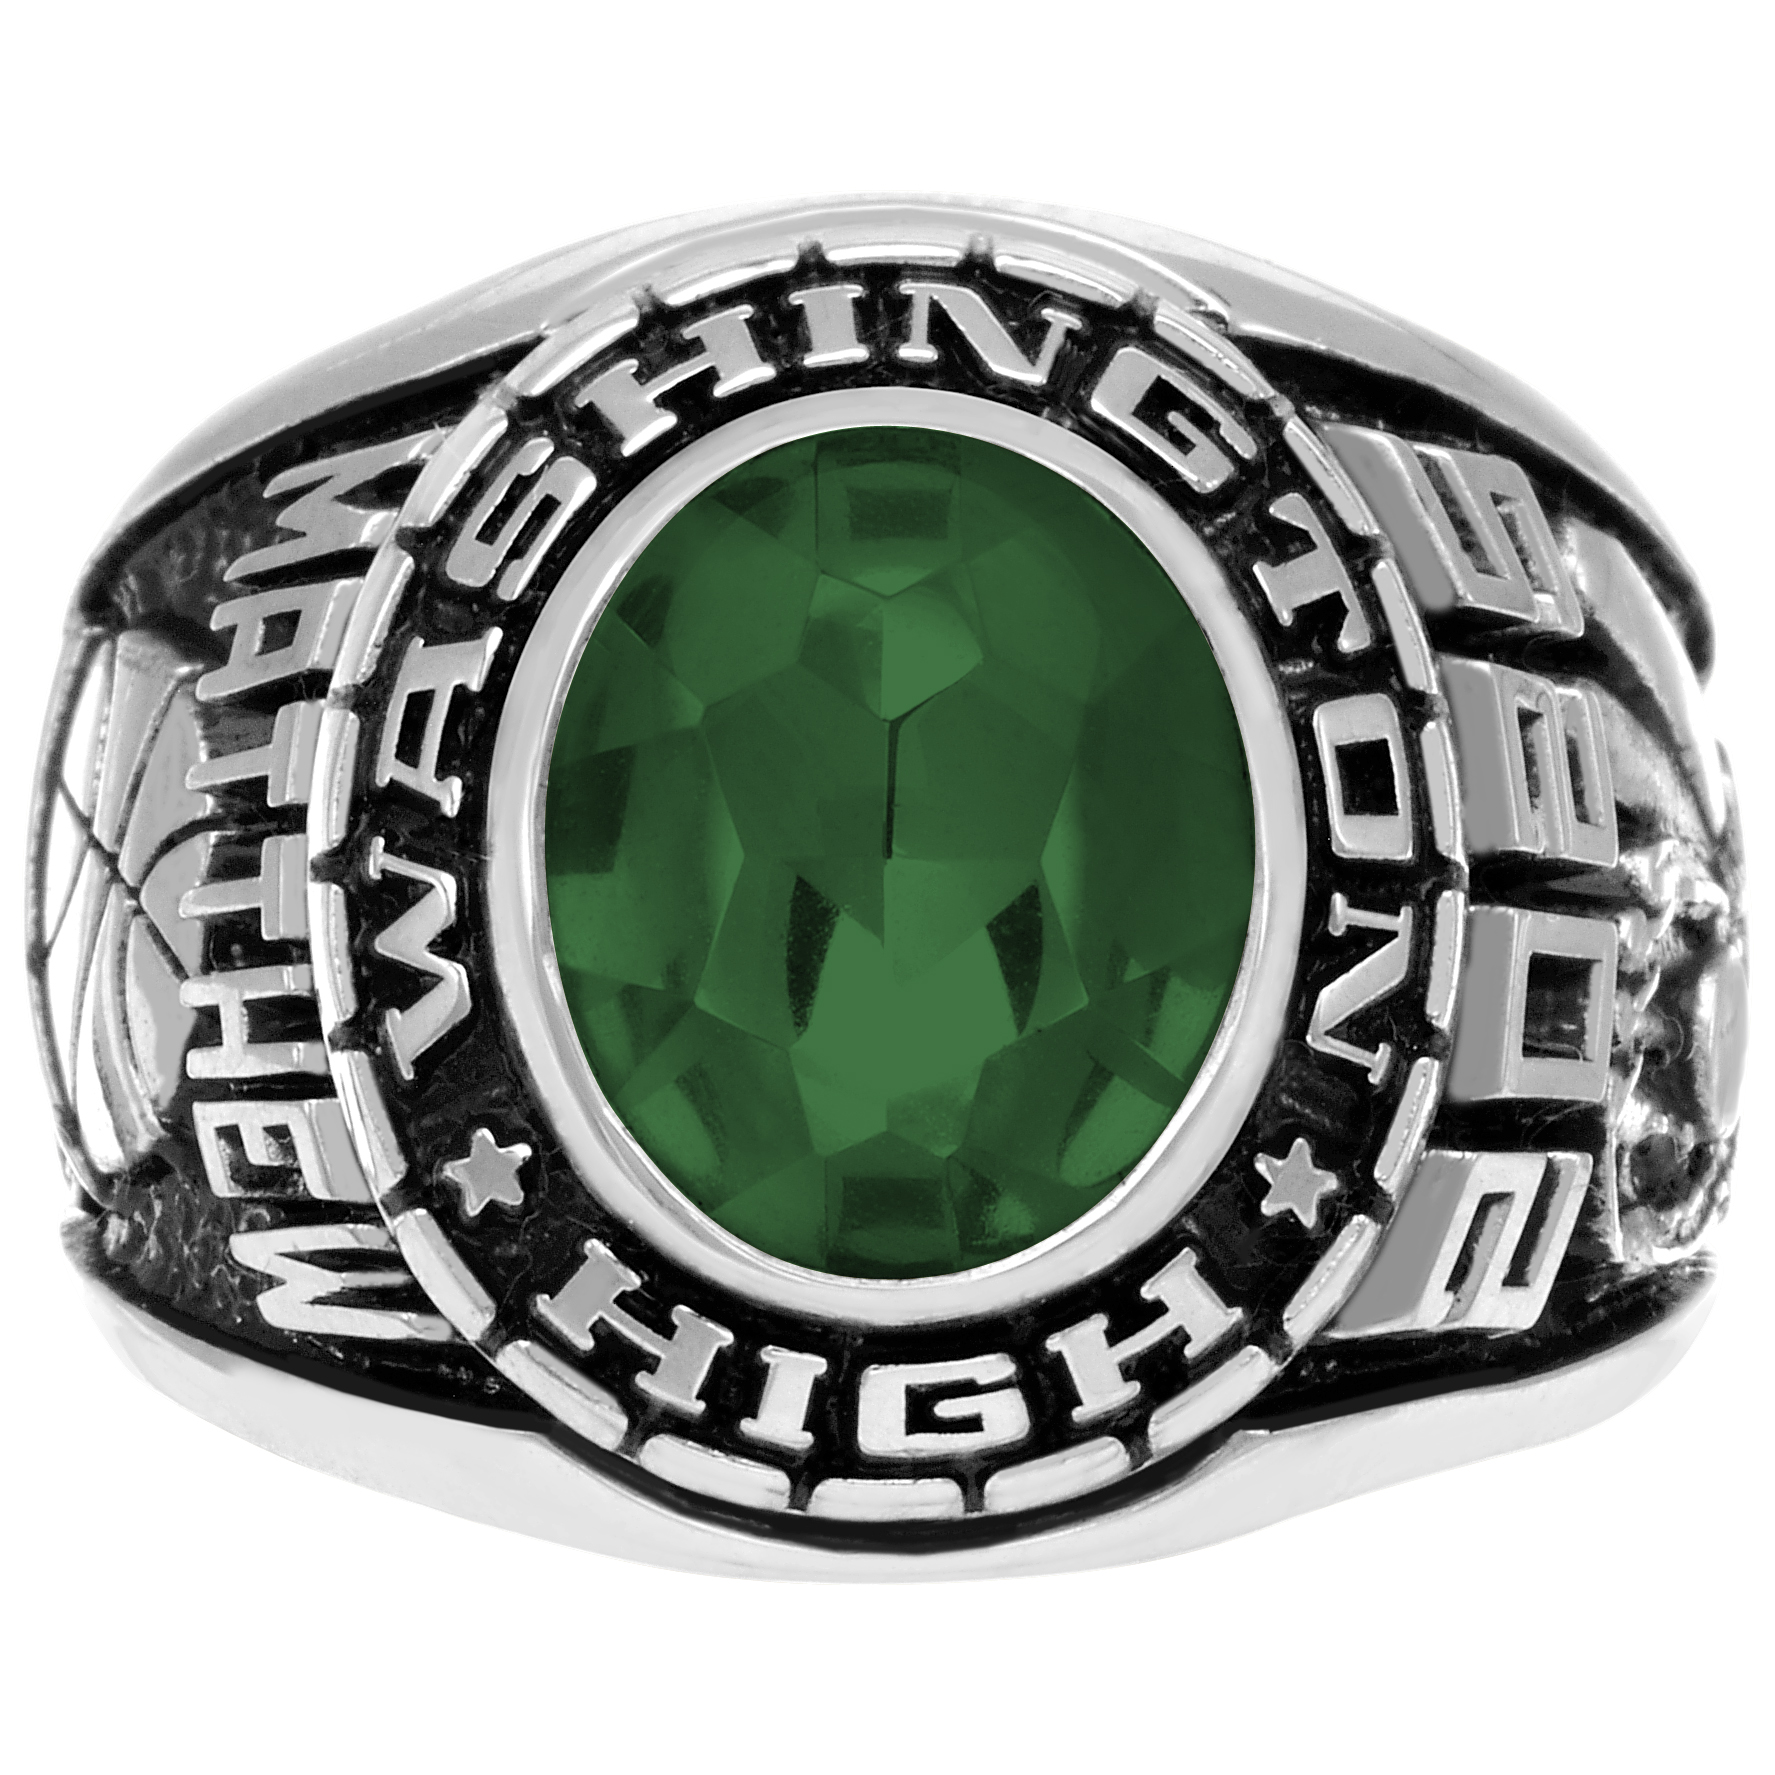 Image of Men's Customizable Large Traditional Class Ring with Oval Stone - Medalist